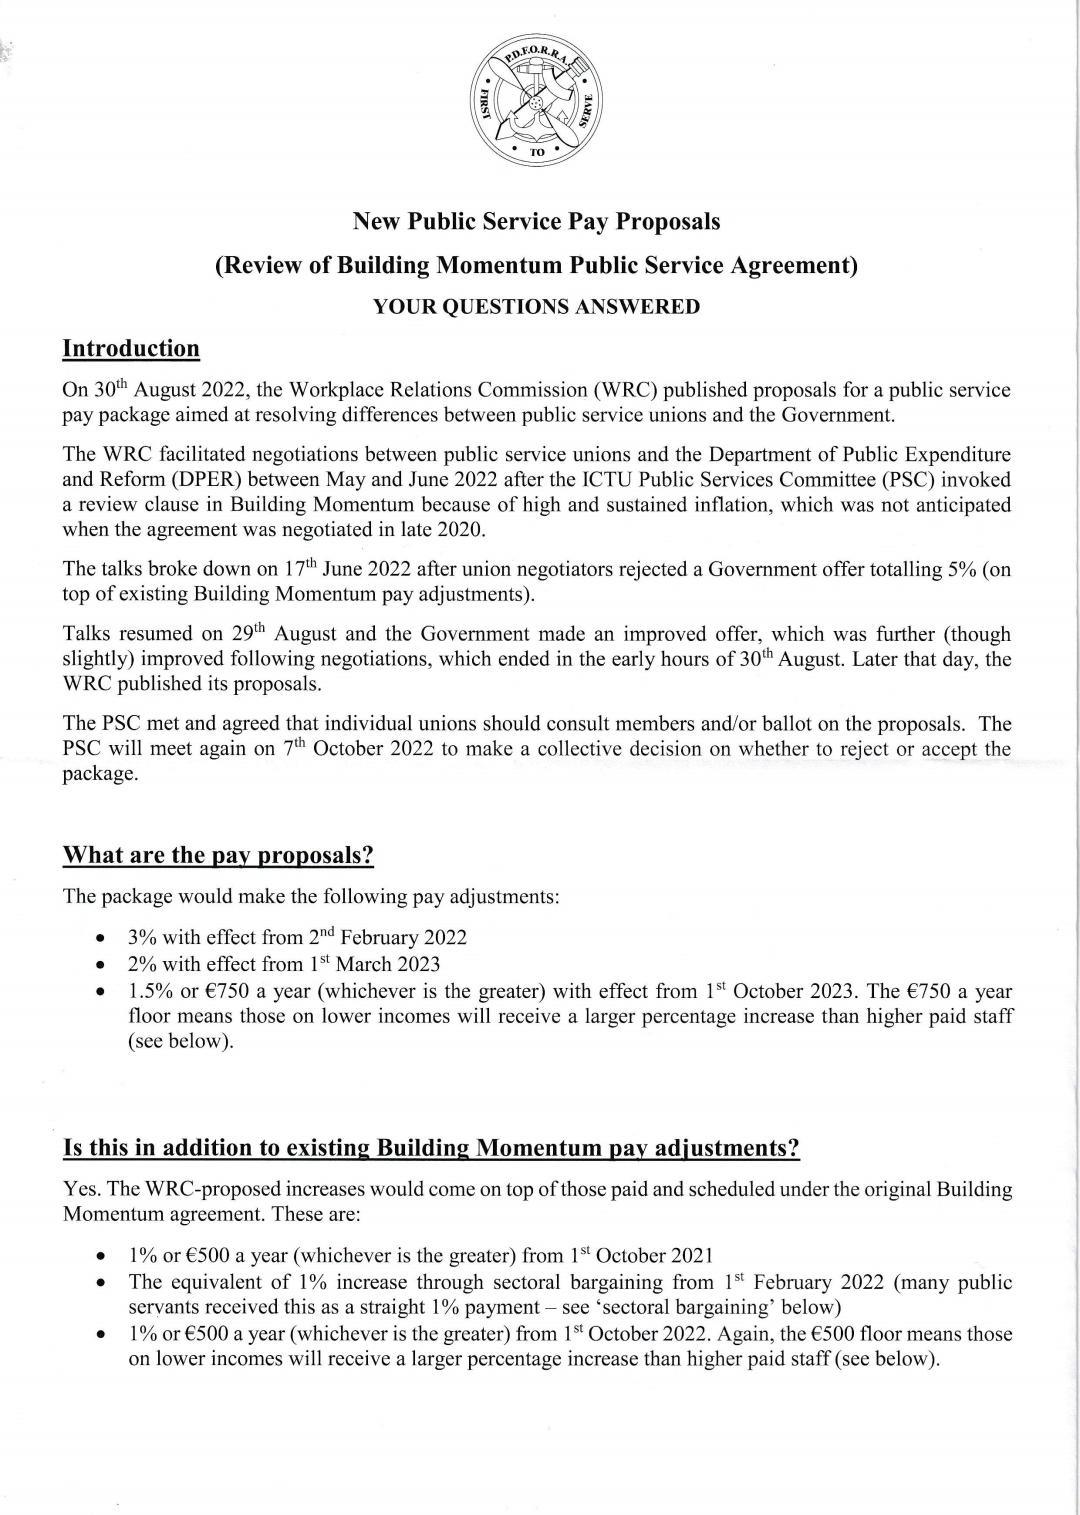 Ballot Booklet - Review of Building Momentum Public Service Agreement